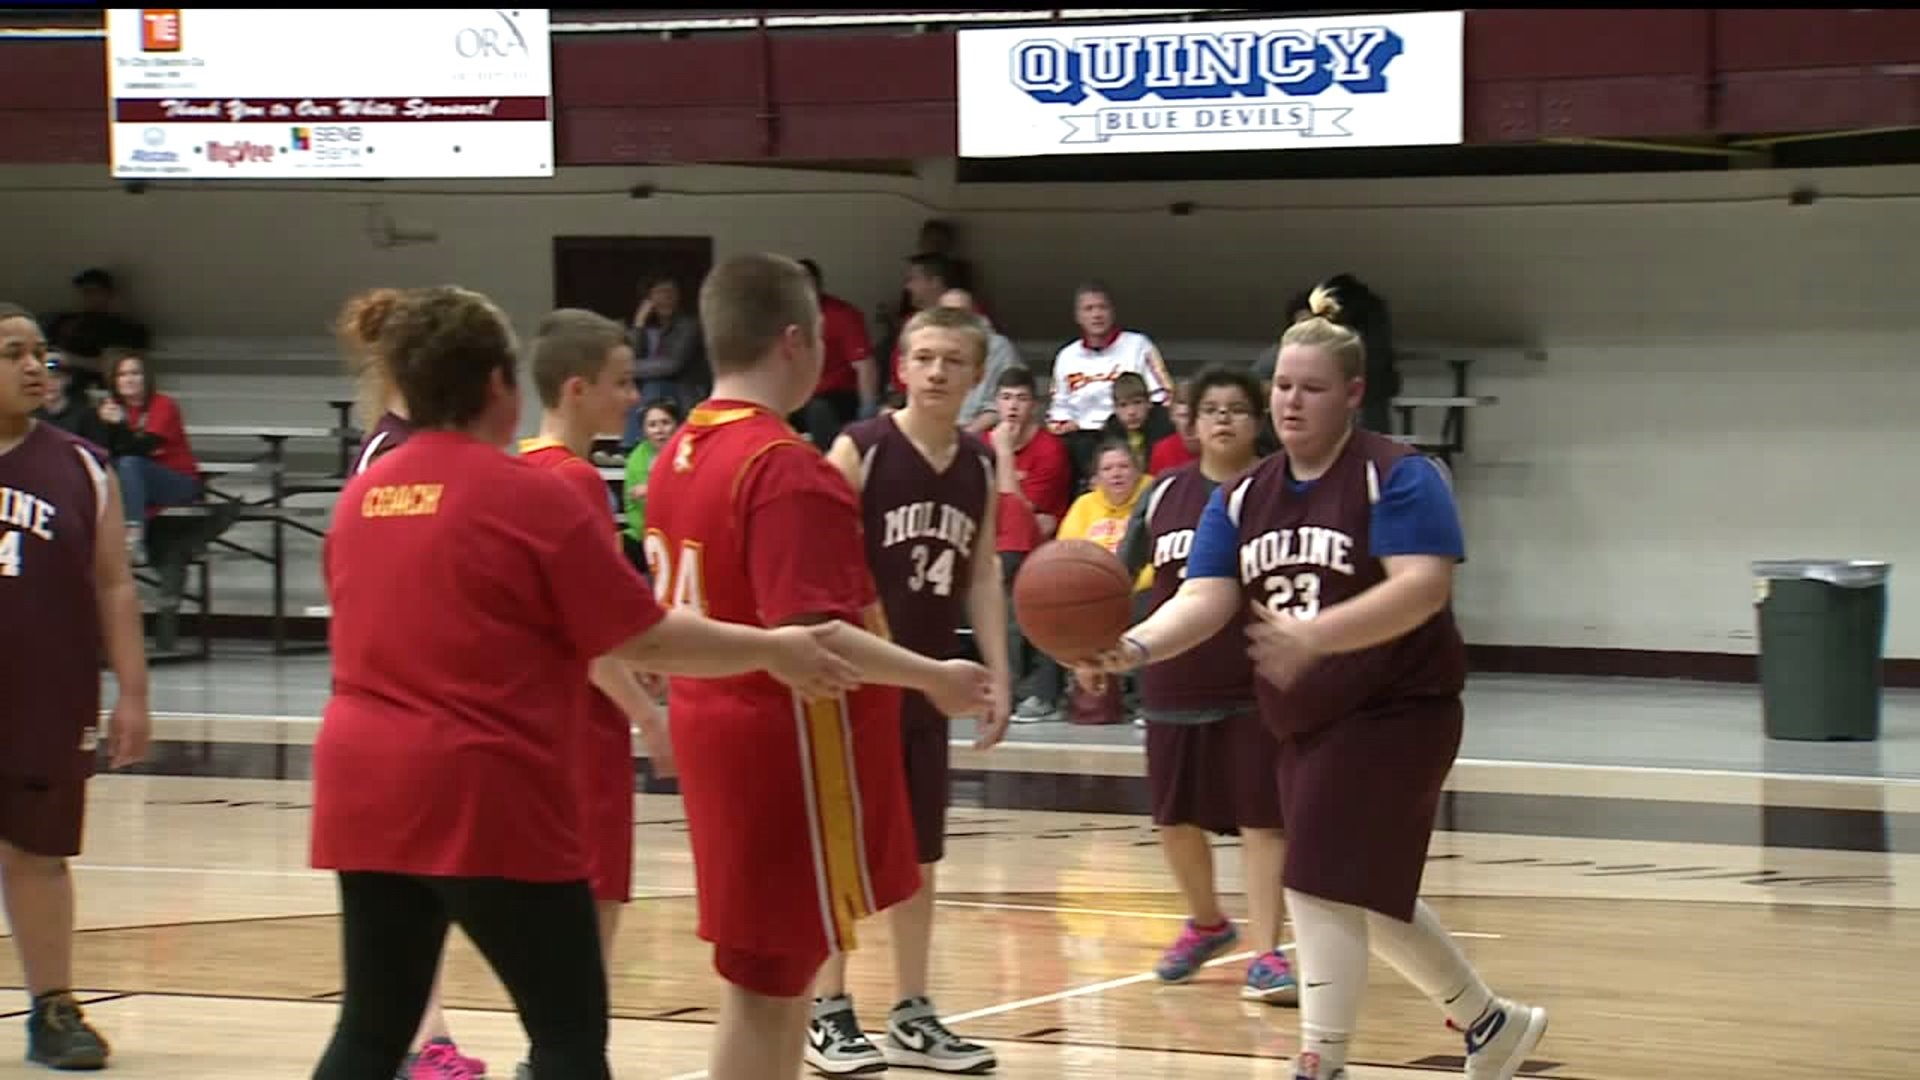 Special Olympics in Moline